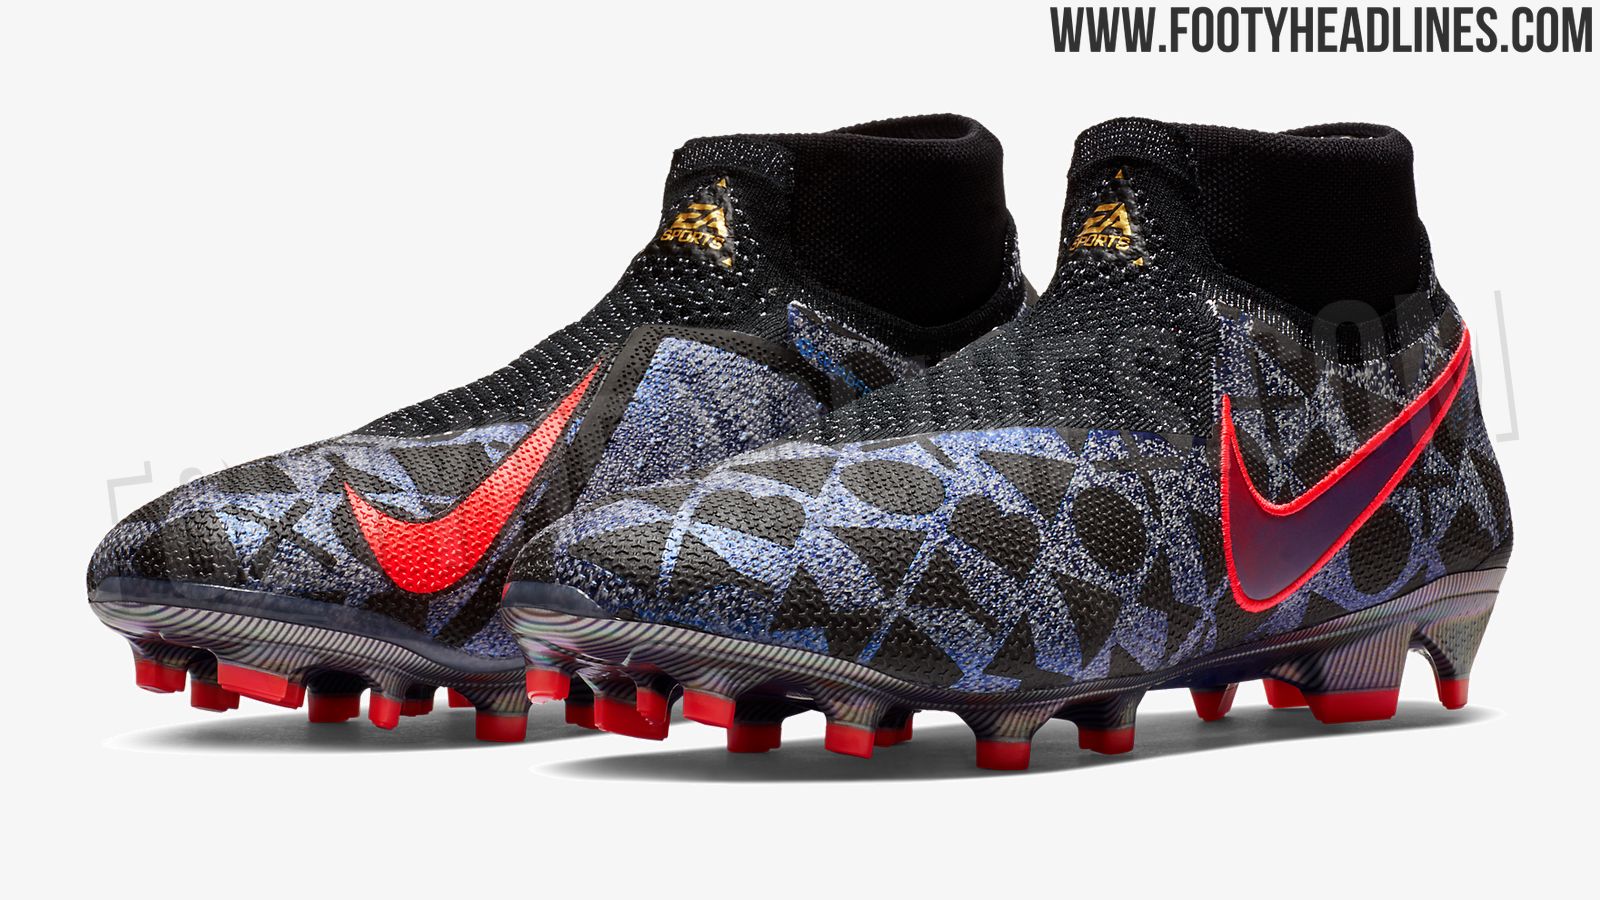 Nike x Sports Vision 2018 Boots Released - Footy Headlines